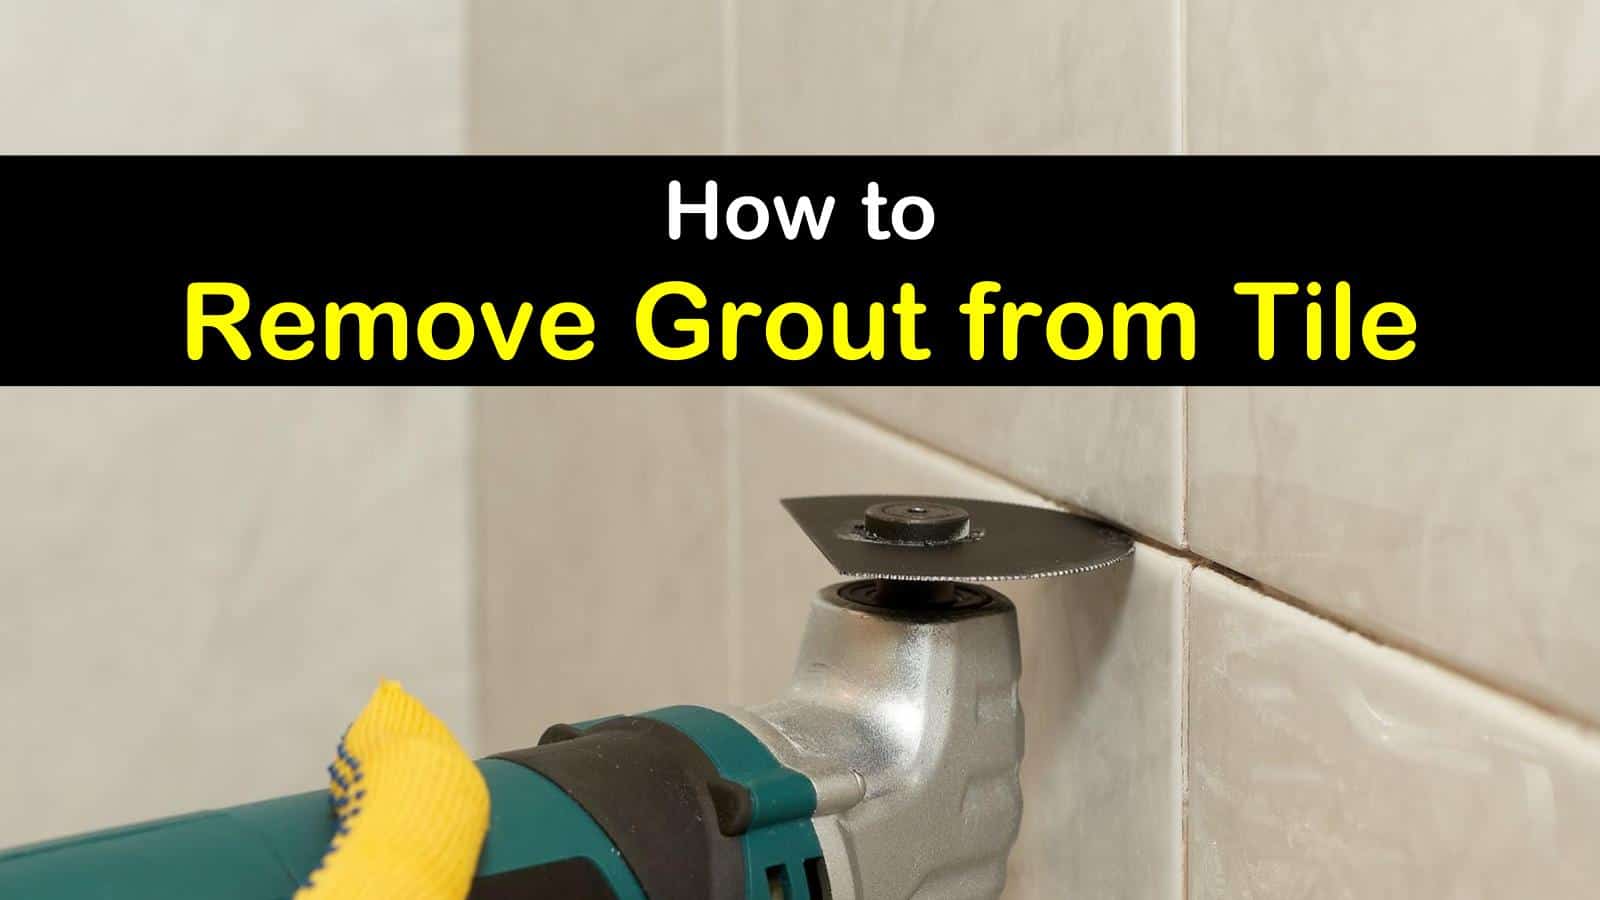 8 Crafty Ways To Remove Grout From Tile, How To Replace Grout On Tiles